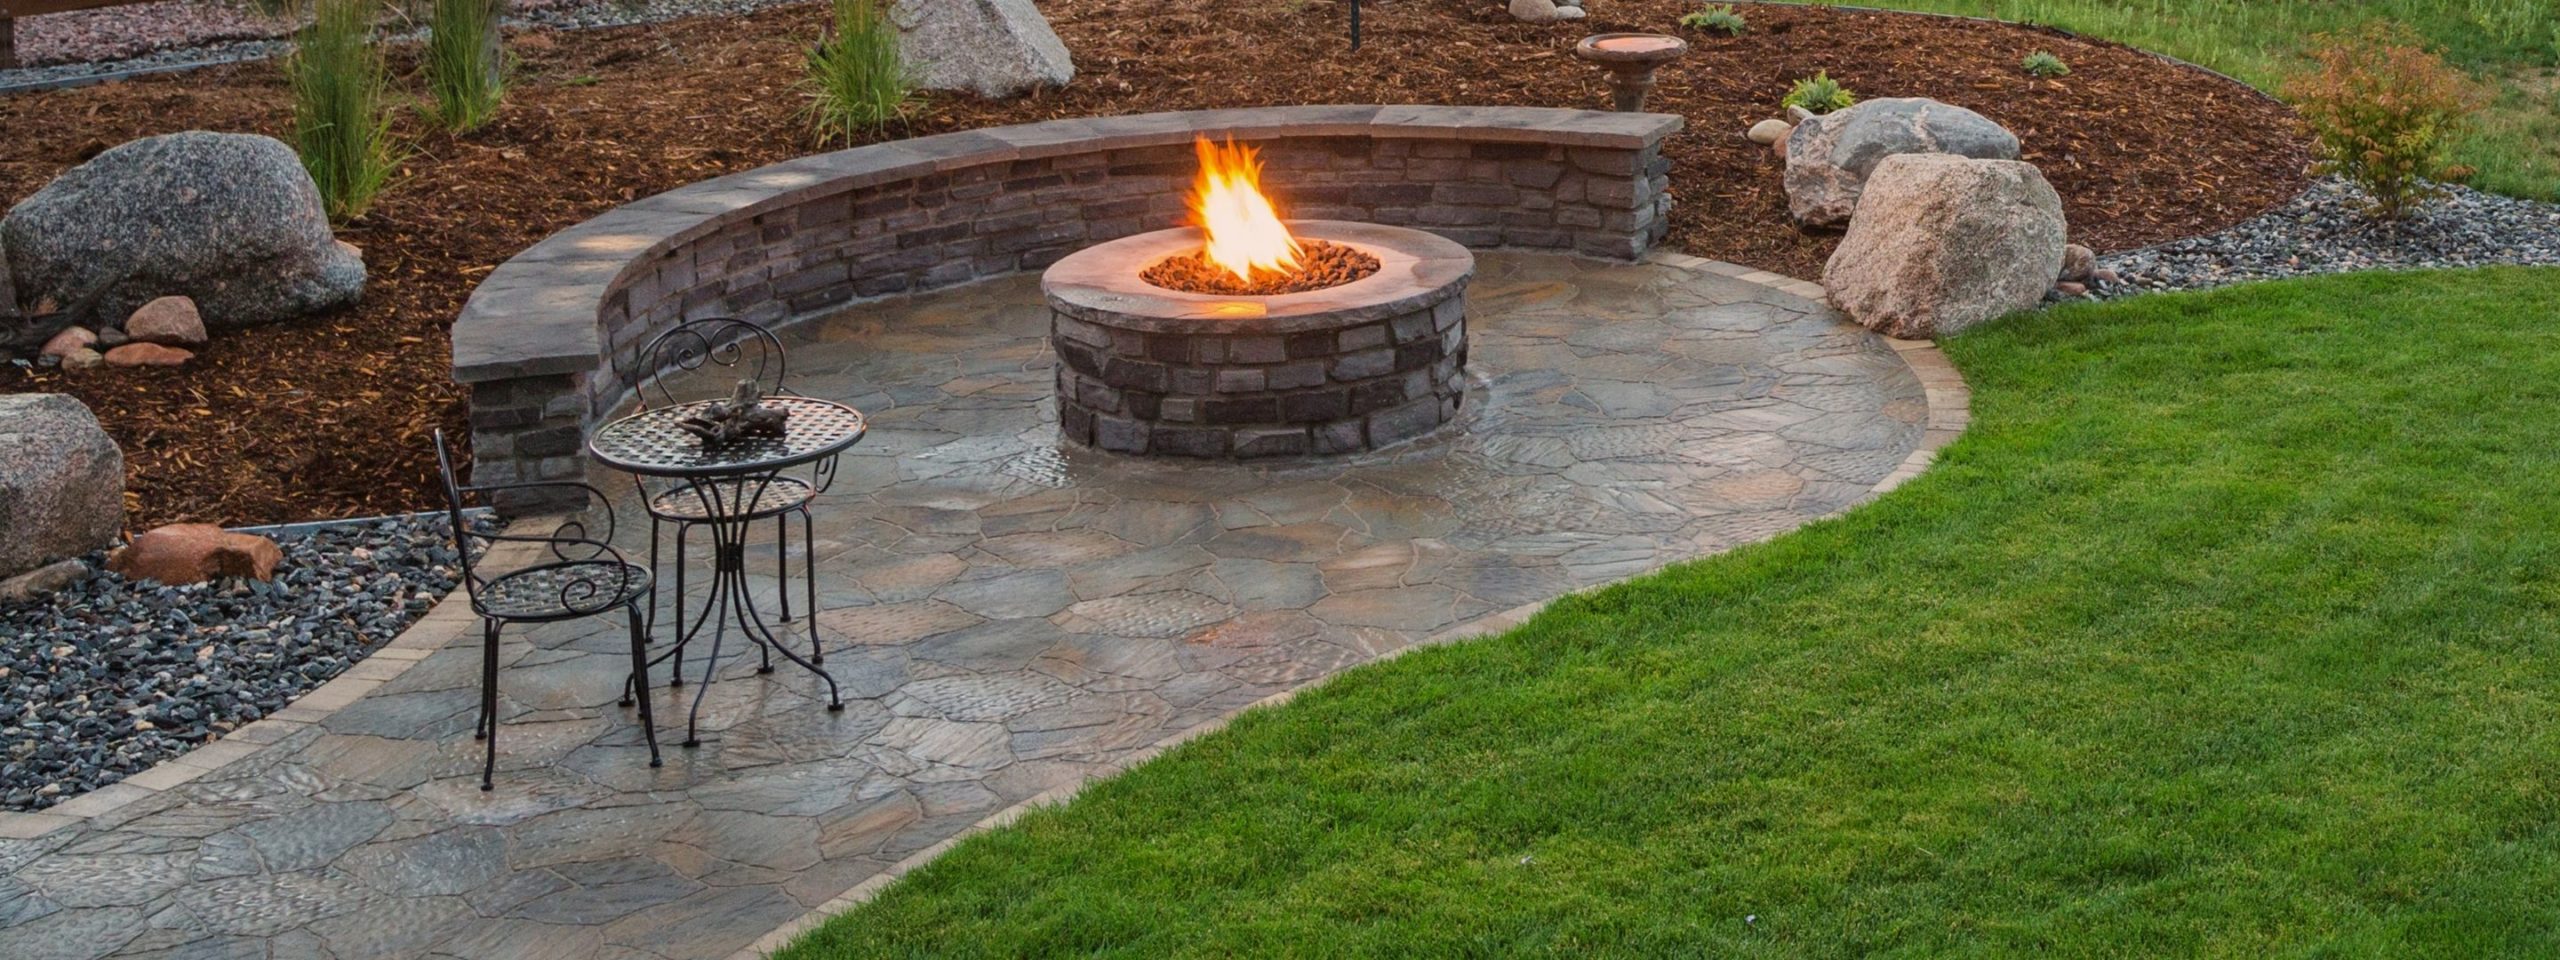 Big Bend Landscaping St Louis Missouri Design And Build Hardscaping